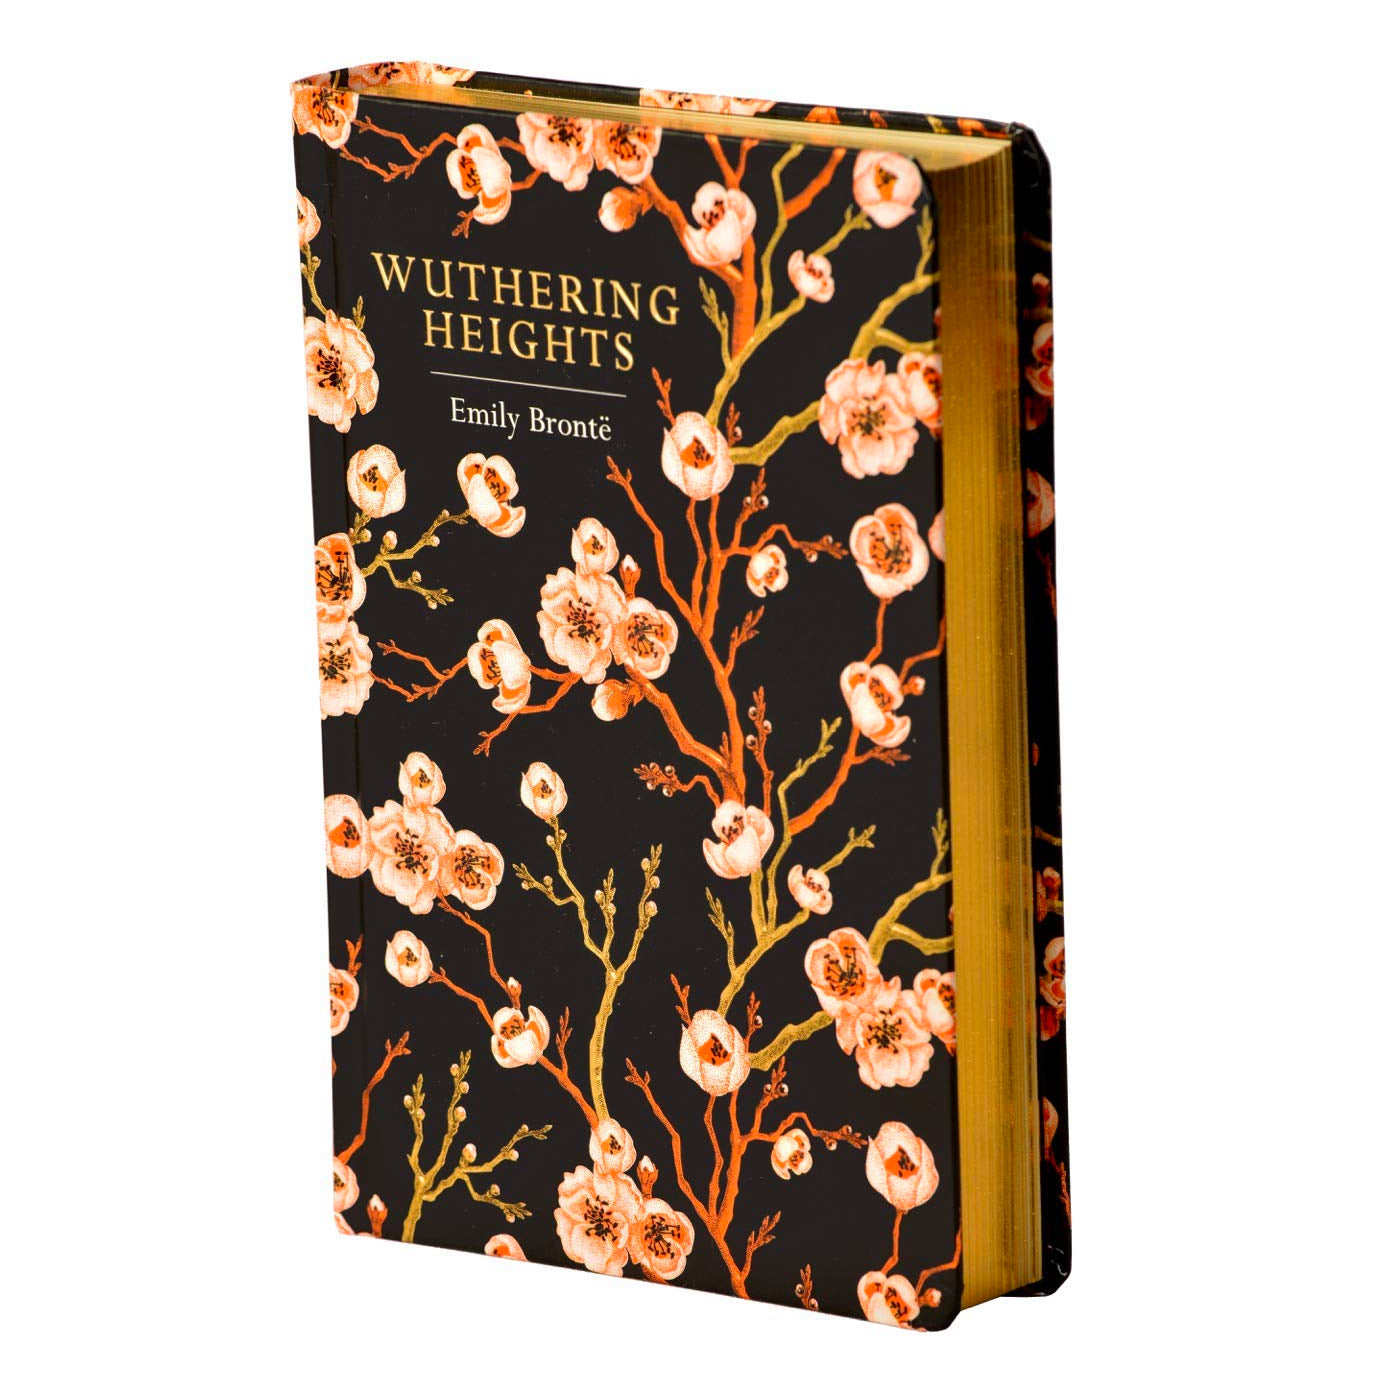 Wuthering Heights - Emily Bronte - Chiltern Classic Edition